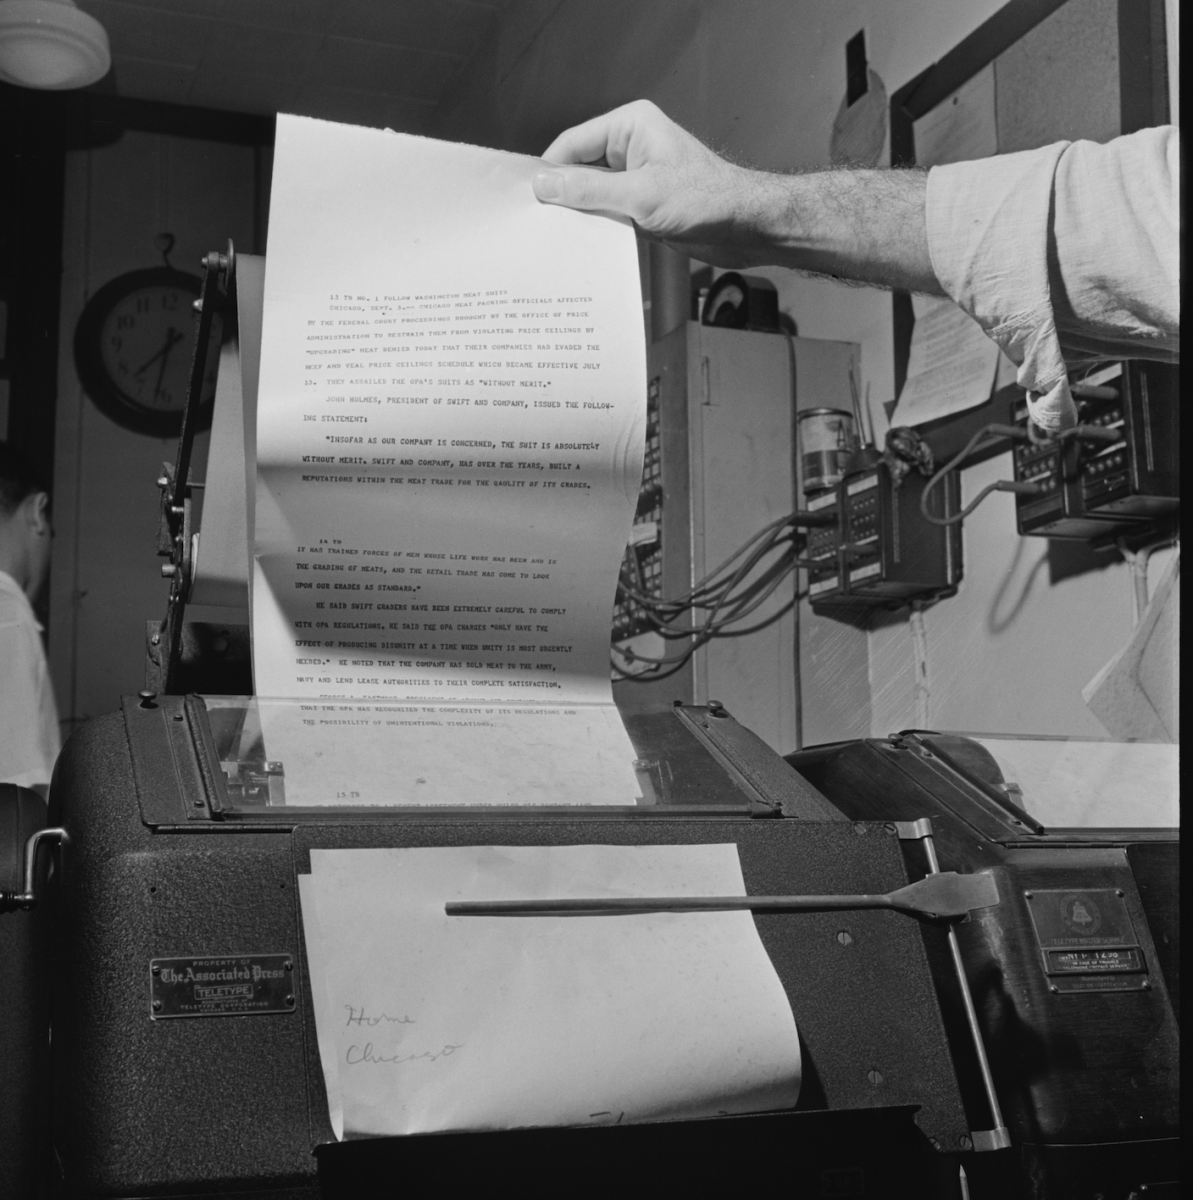 This is a picture of a teletype machine at <em>The New York Times </em>in the 1940s. The teletype was basically the precursor to email. They would have rooms full of these machines clacking and whirring away all the time spitting out news. They were on a wire system that would bring in news from all over the world from different news agencies. They had AP teletypes and Reuters teletypes and they would get teletypes from their own international bureaus. It was a very significant piece of technology that I think was much more advanced than one might think for the ‘40s.